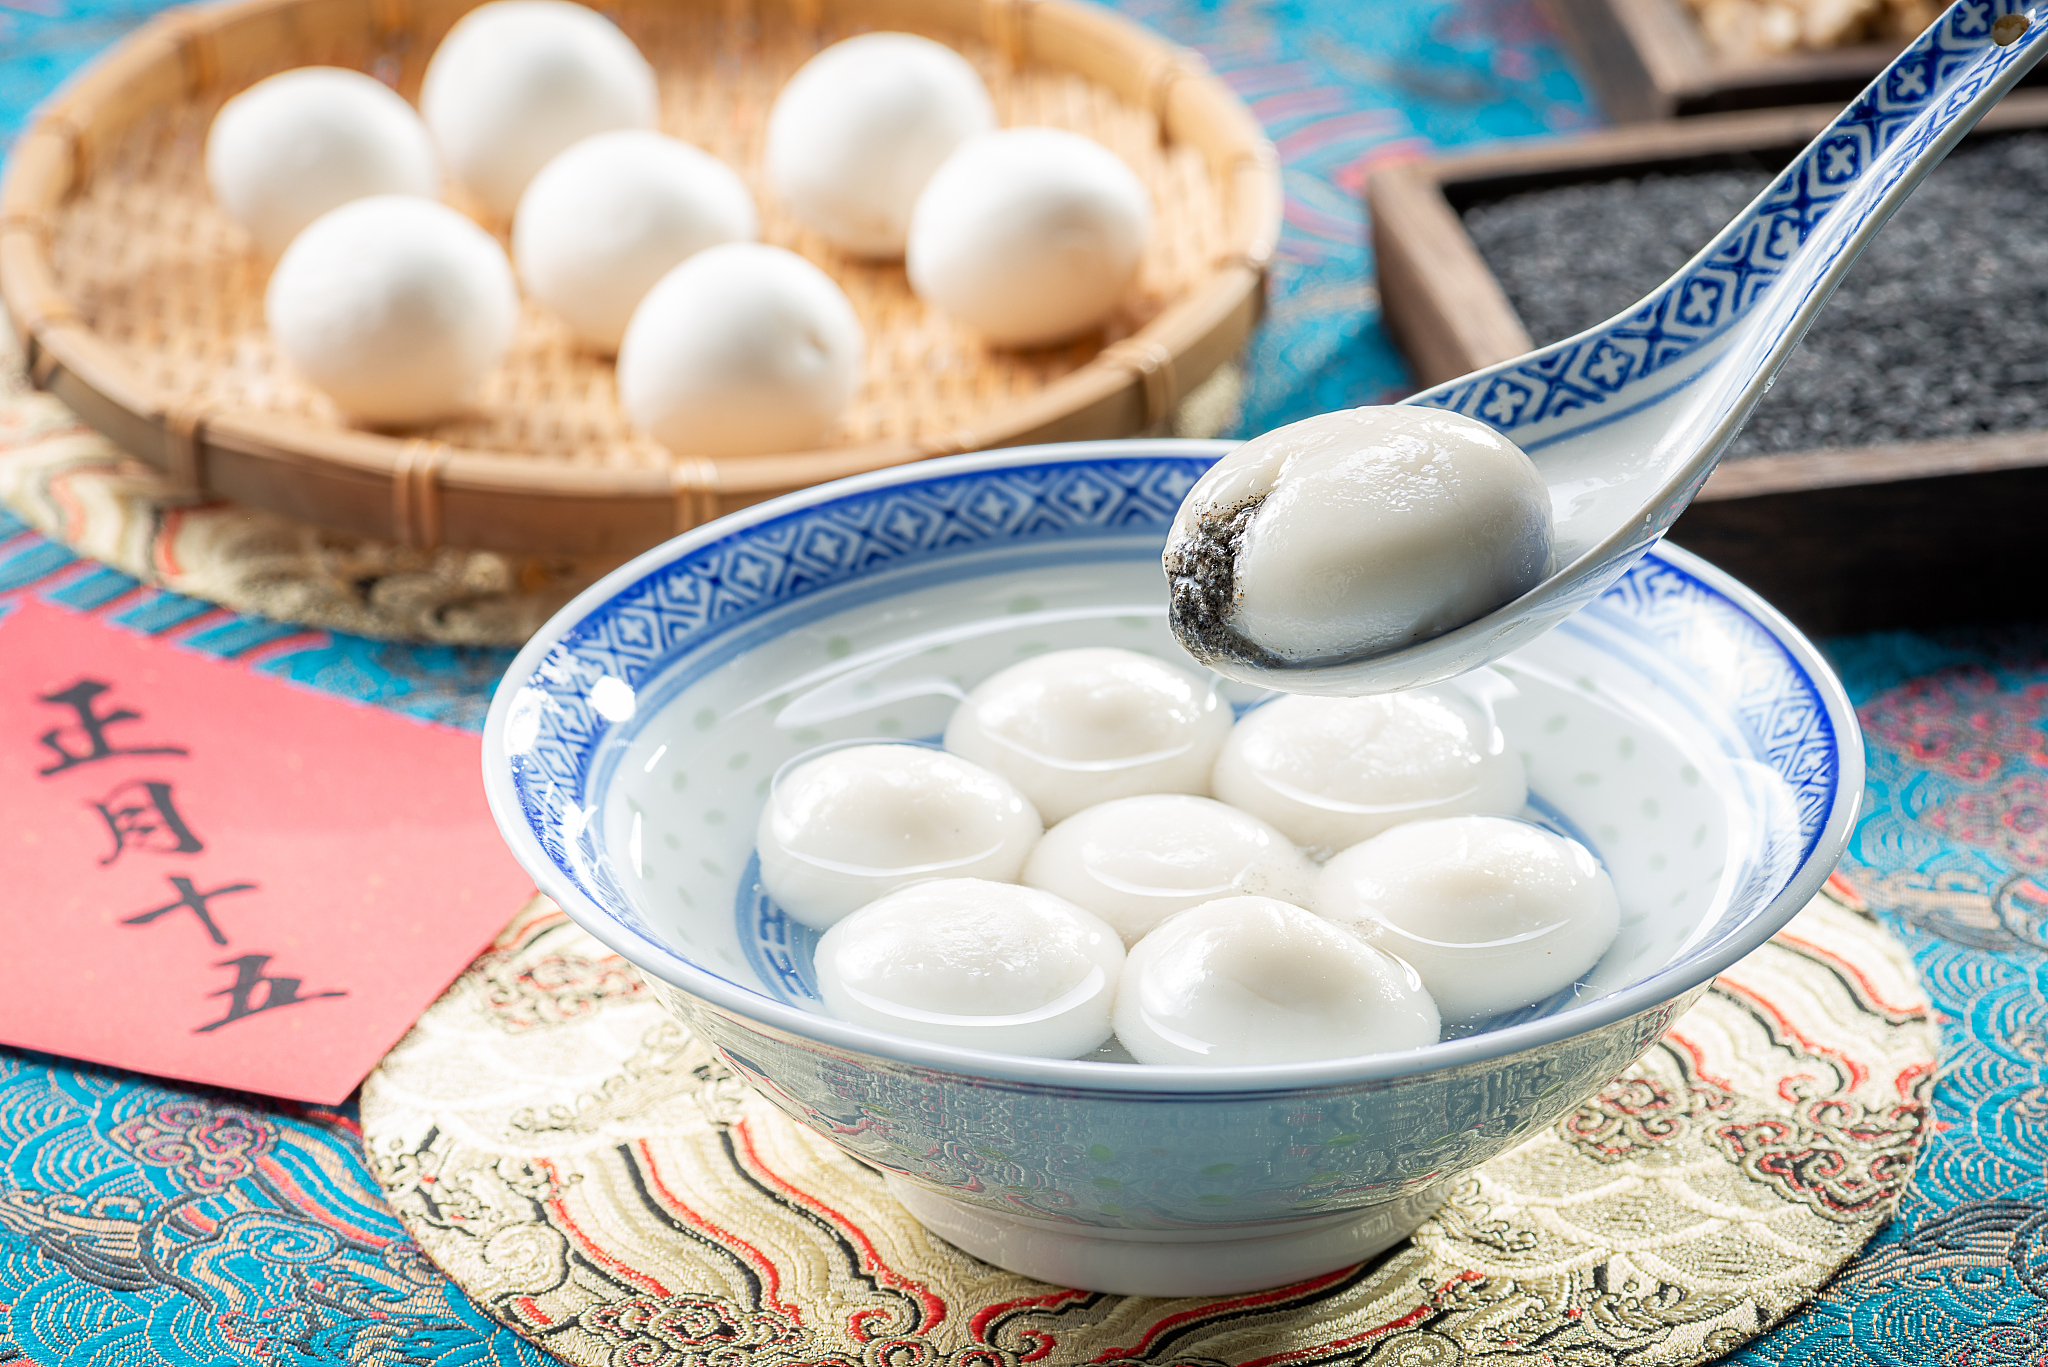 Eating tangyuan or yuanxiao—sweet or savory glutinous rice balls—is a beloved festival tradition. Their round shape symbolizes completeness and reunion, embodying themes of harmony, family unity, and health. /CFP